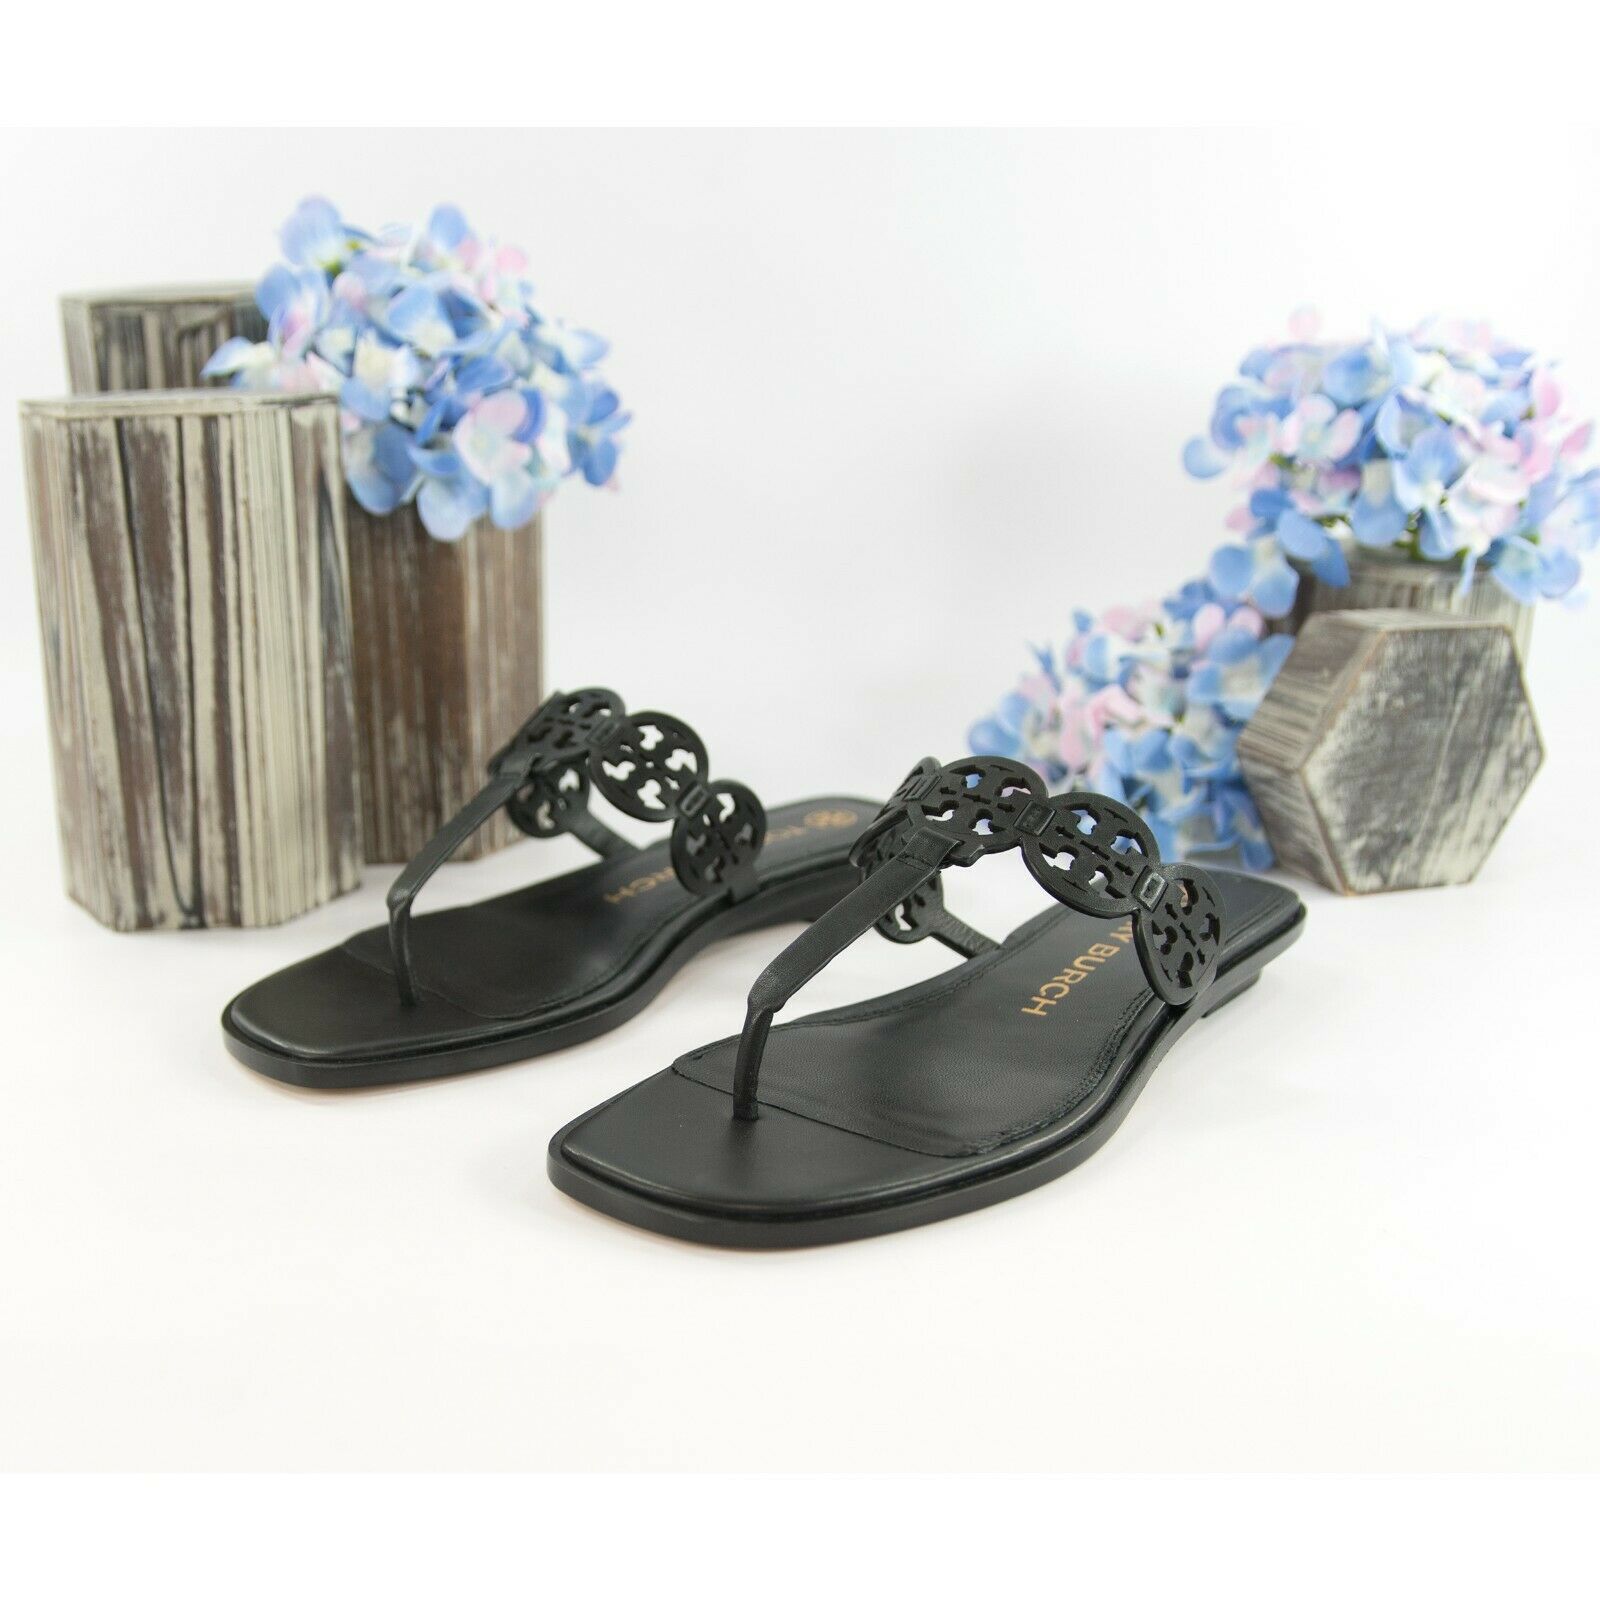 Buy the Tory Burch Black Leather Sandals US 7